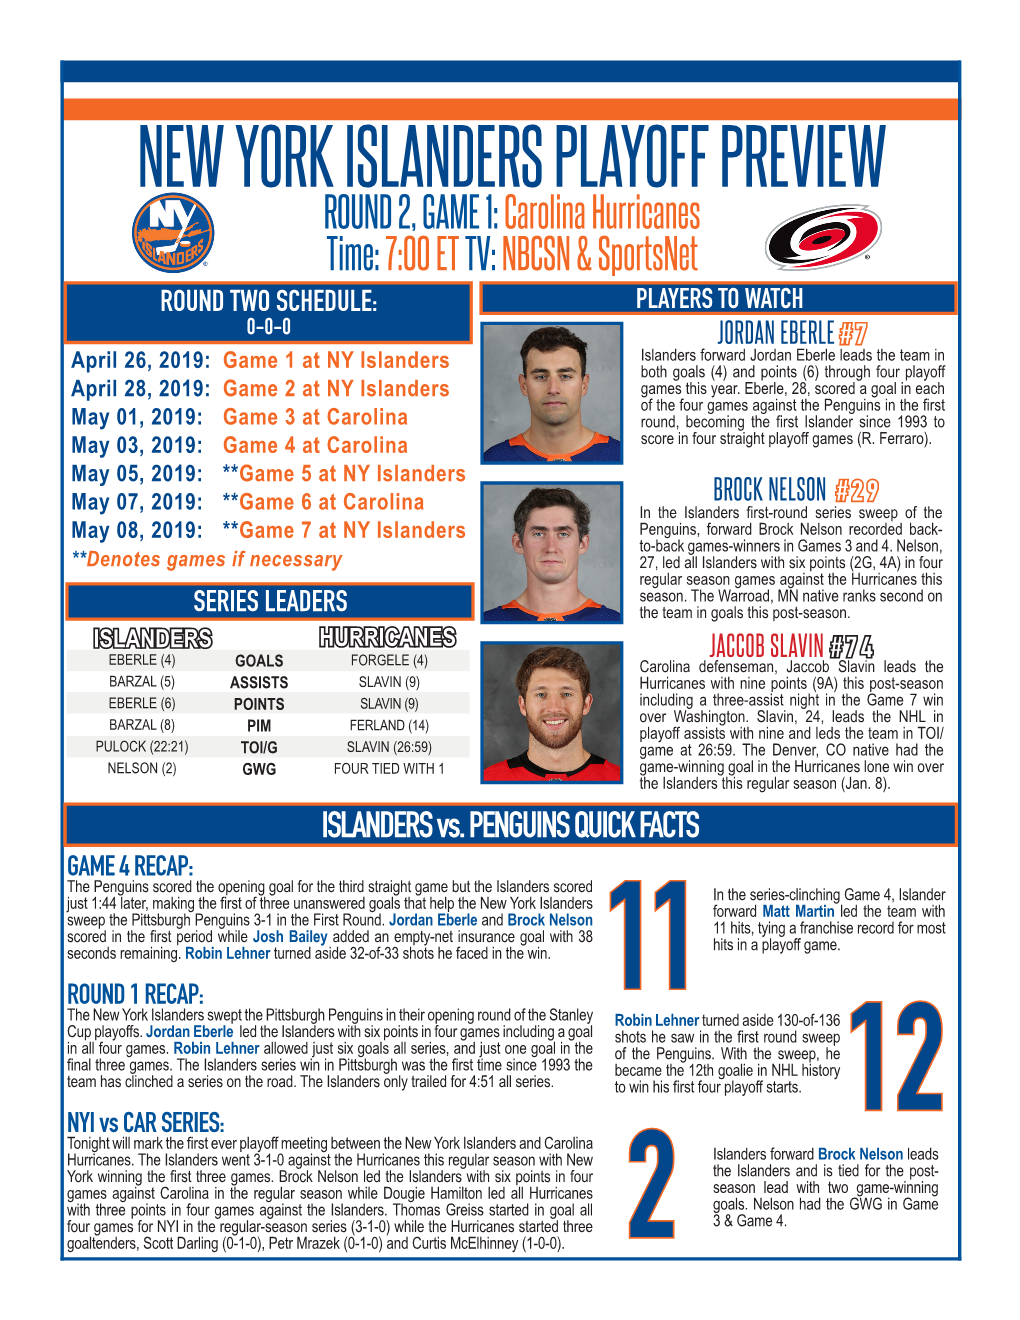 New York Islanders Playoff Preview